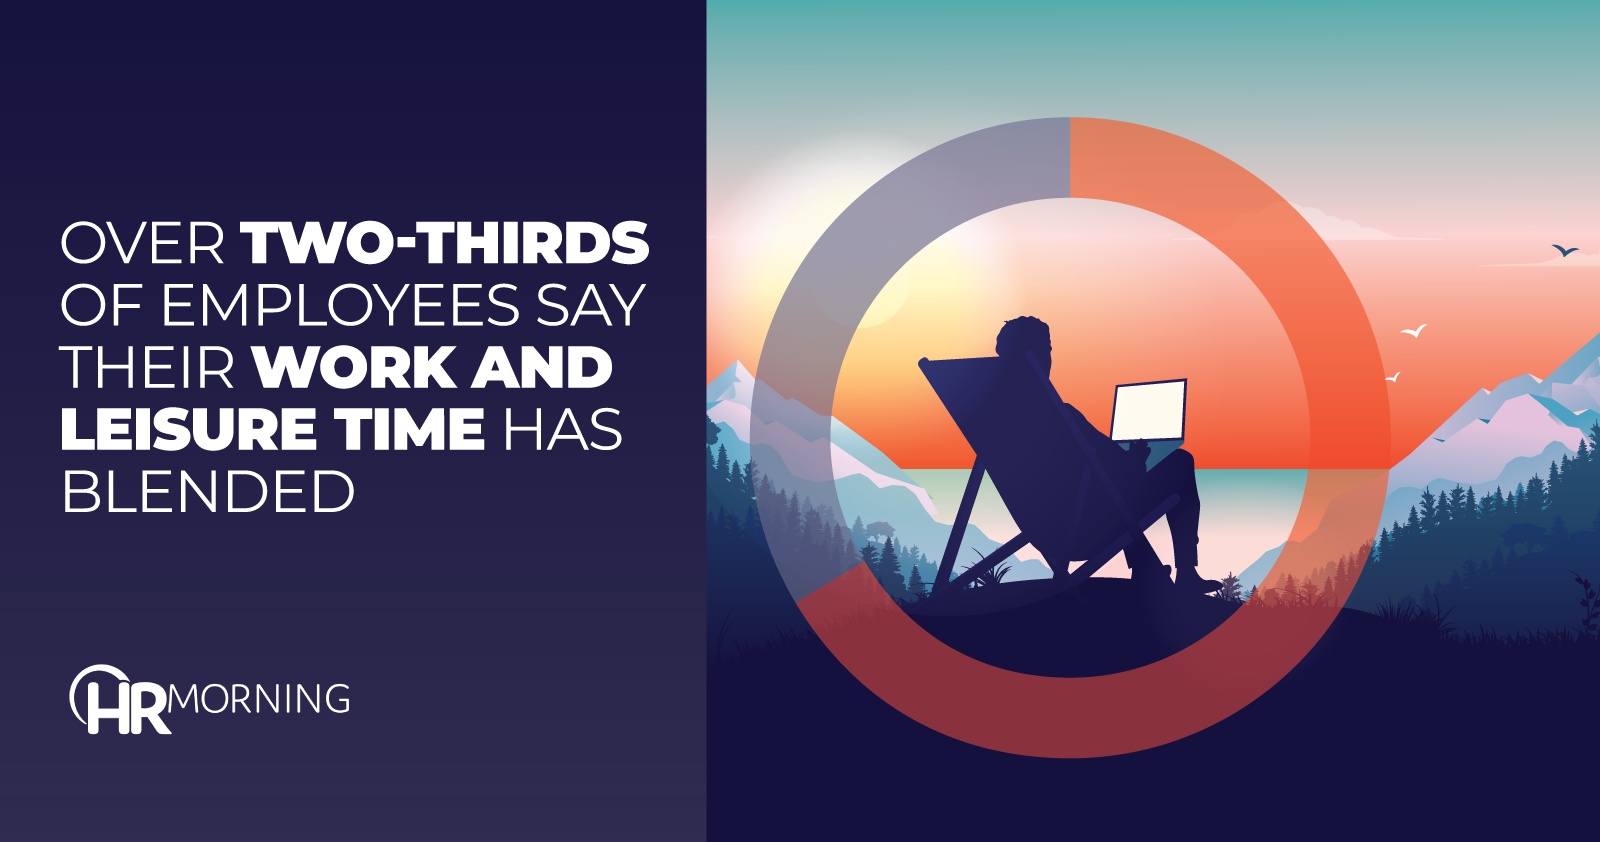 Over two-thirds of employees say their work and leisure time has blended